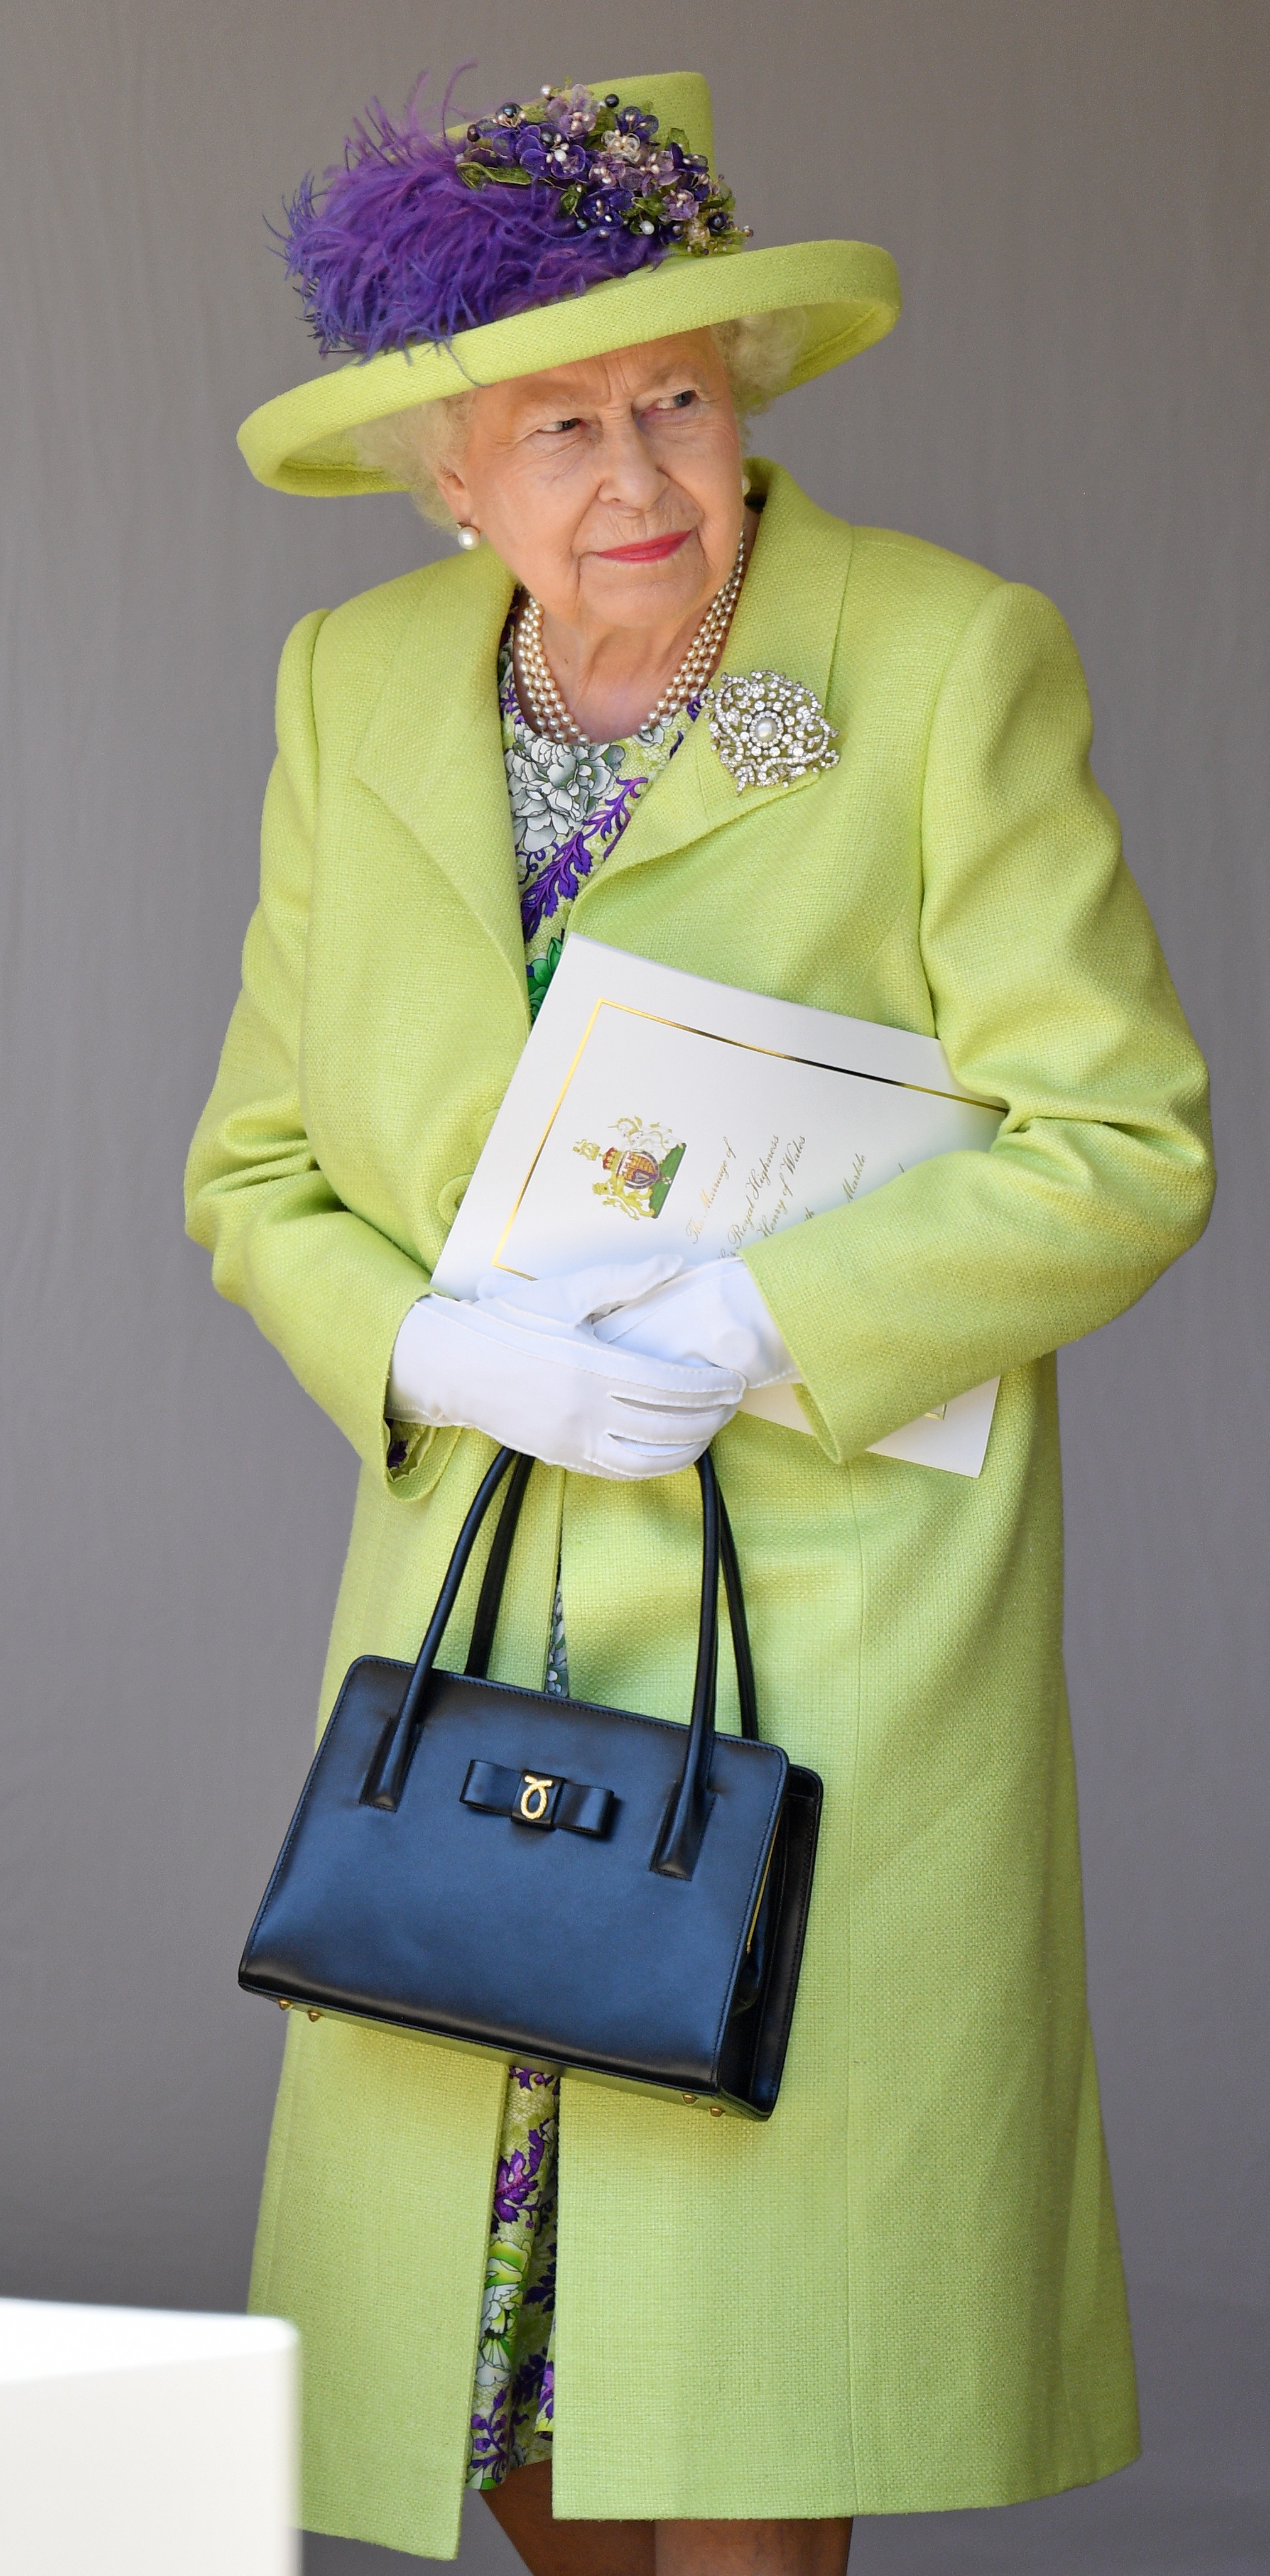 WINDSOR, UNITED KINGDOM - MAY 19: (EMBARGOED FOR PUBLICATION IN UK NEWSPAPERS UNTIL 24 HOURS AFTER CREATE DATE AND TIME) Queen Elizabeth II attends the wedding of Prince Harry to Ms Meghan Markle at St George's Chapel, Windsor Castle on May 19, 2018 in Wi (Foto: Getty Images)